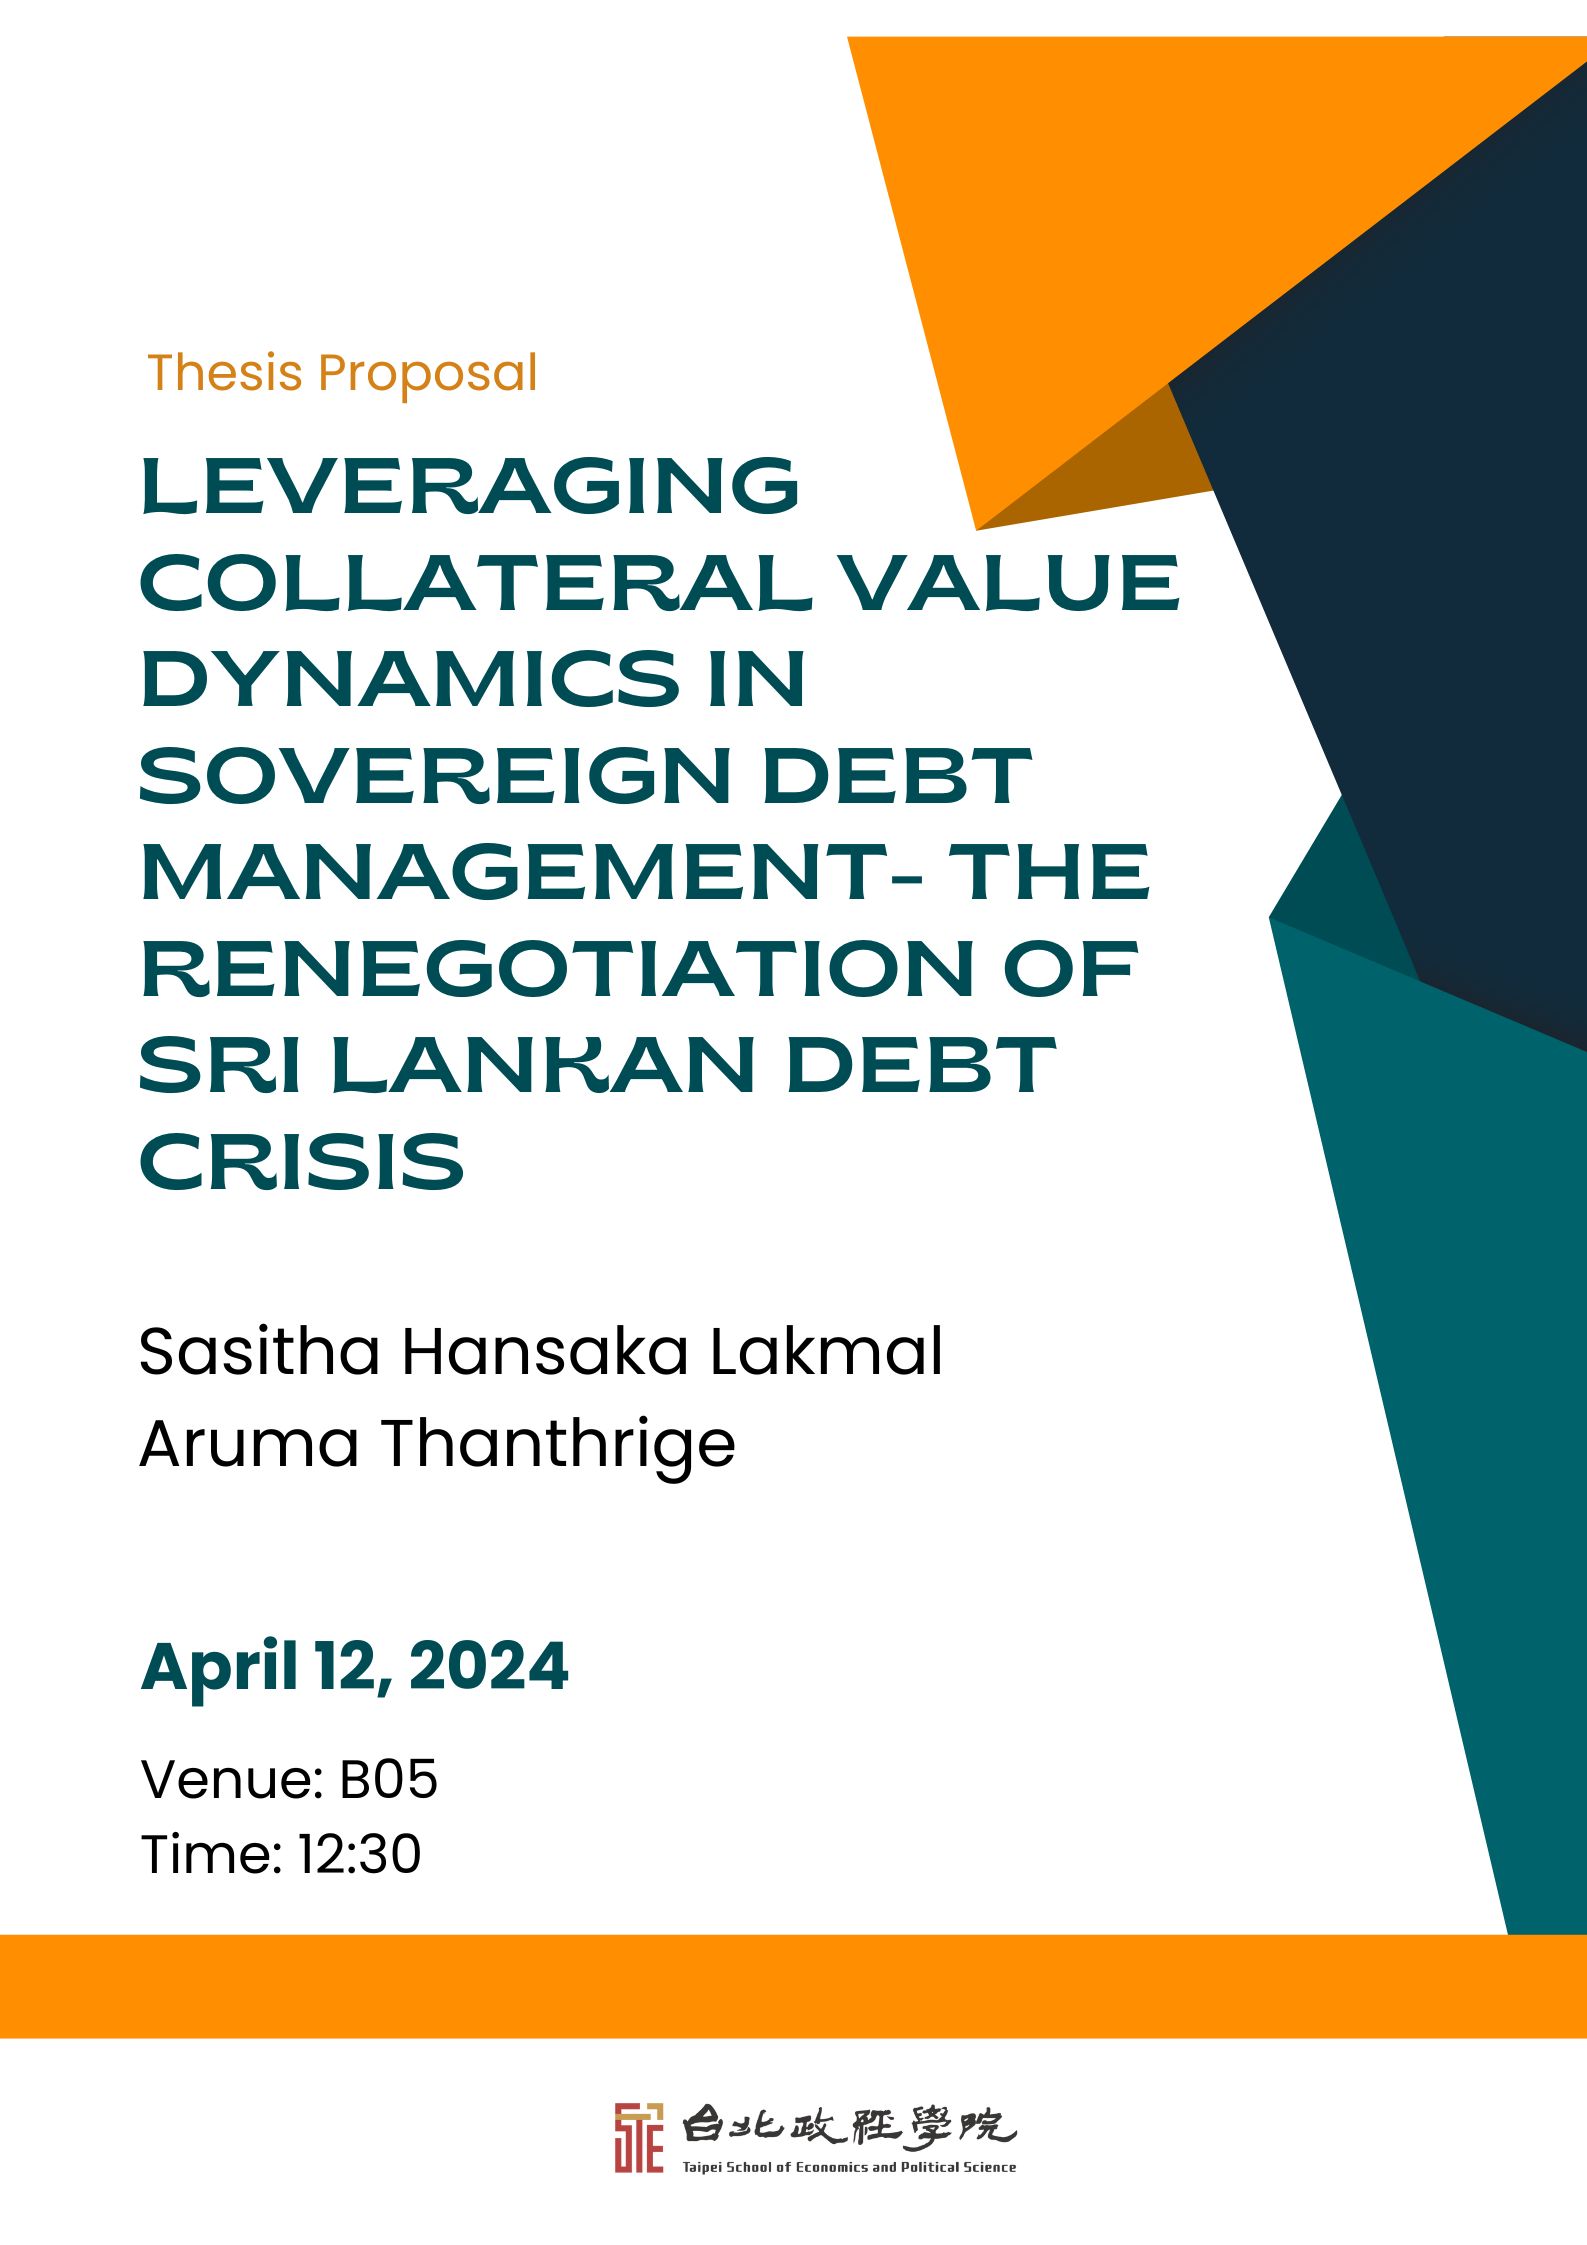 MA Thesis Proposal Presentation at B05 on April 12 2024 at 12:30 PM titled "Leveraging Collateral Value Dynamics in Sovereign Debt Management- The  Renegotiation of Sri Lankan Debt Crisis" by Sasitha Hansaka Lakmal Aruma Thanthrige